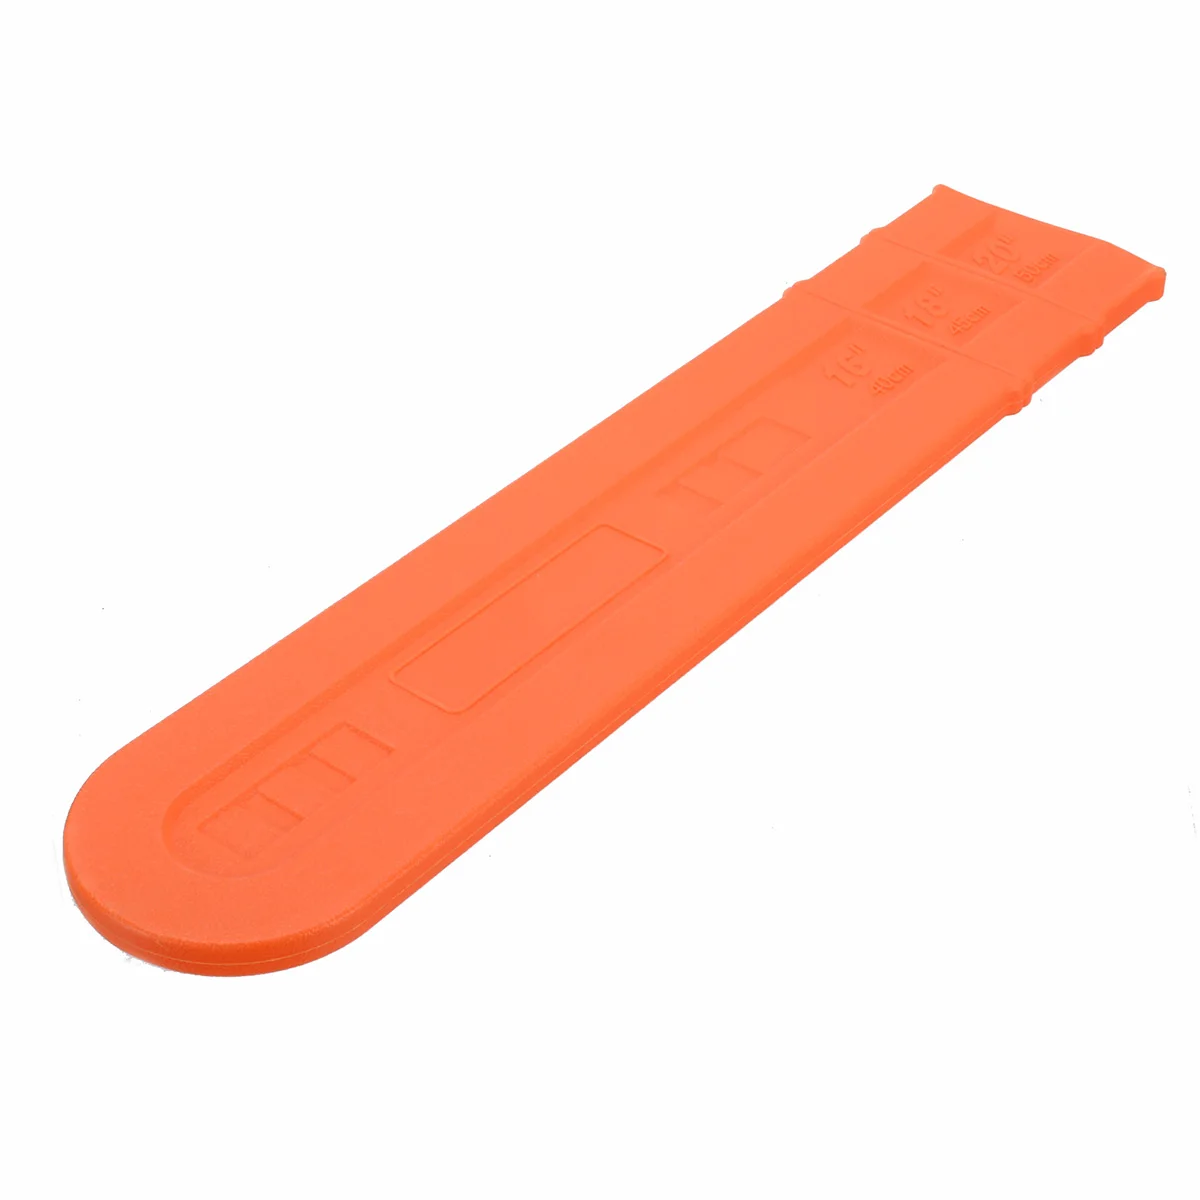 Orange Chainsaw Bar Cover 16'' 18'' 20'' Scabbard Universal Guide Plate For Grass Cutter Garden Agriculture Tools